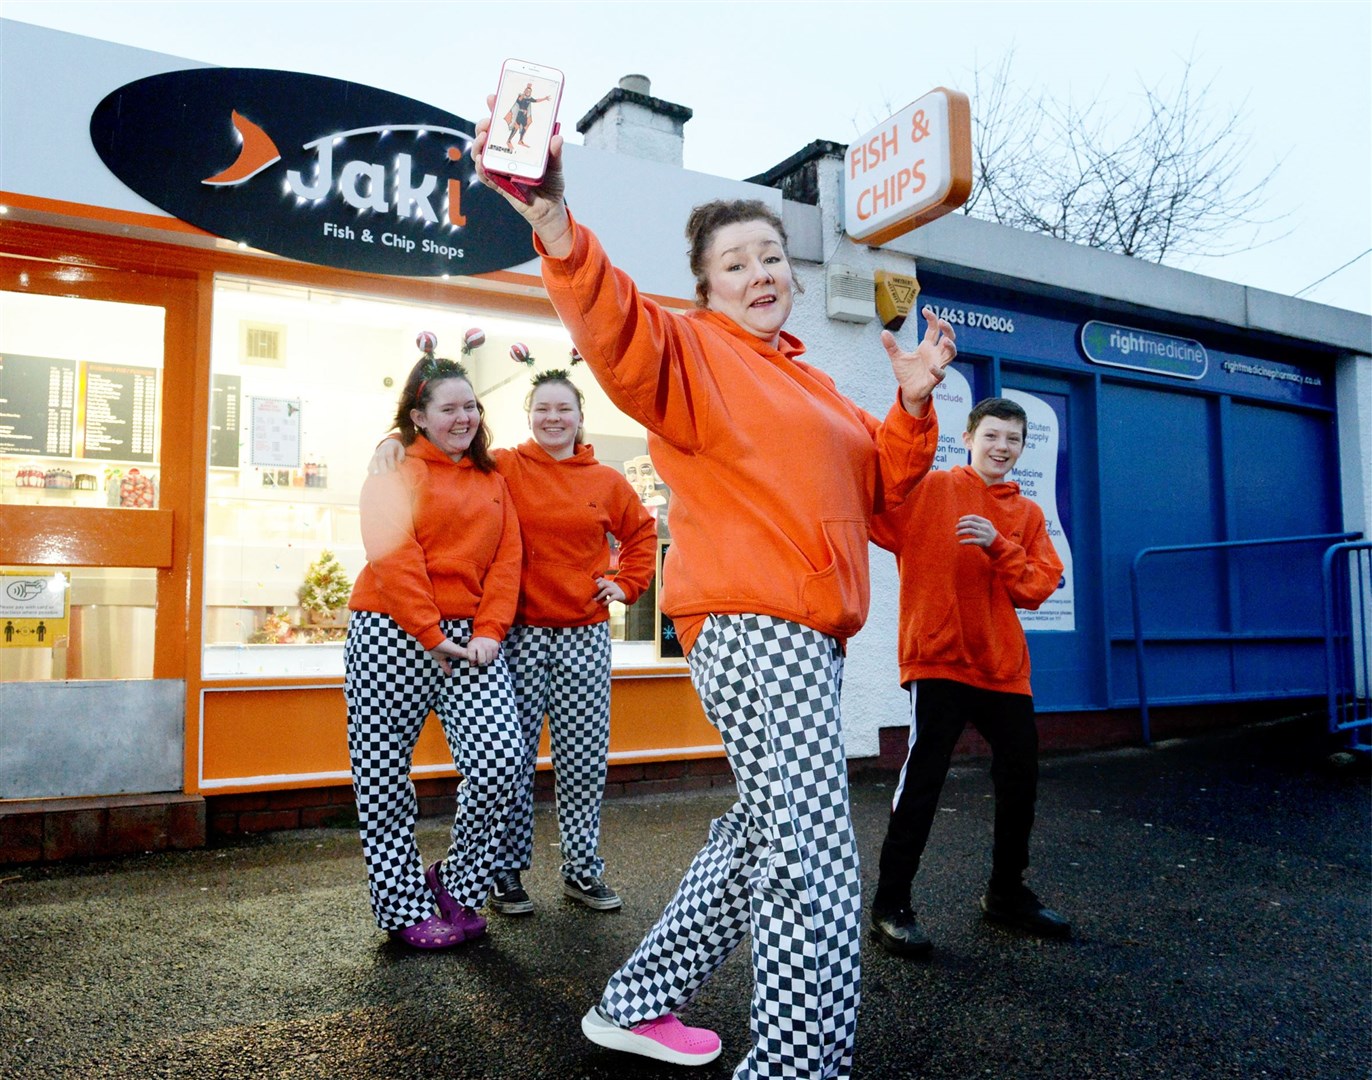 Jaki's Fish & Chip Shop in Muir of Ord has unveiled a new superhero – Batterman. Counter assistant Kirstie Clark, supervisor Connie Urquhart, business owner Jaki Pickett and tattie king Scott Fraser are ready for action. Picture: James Mackenzie